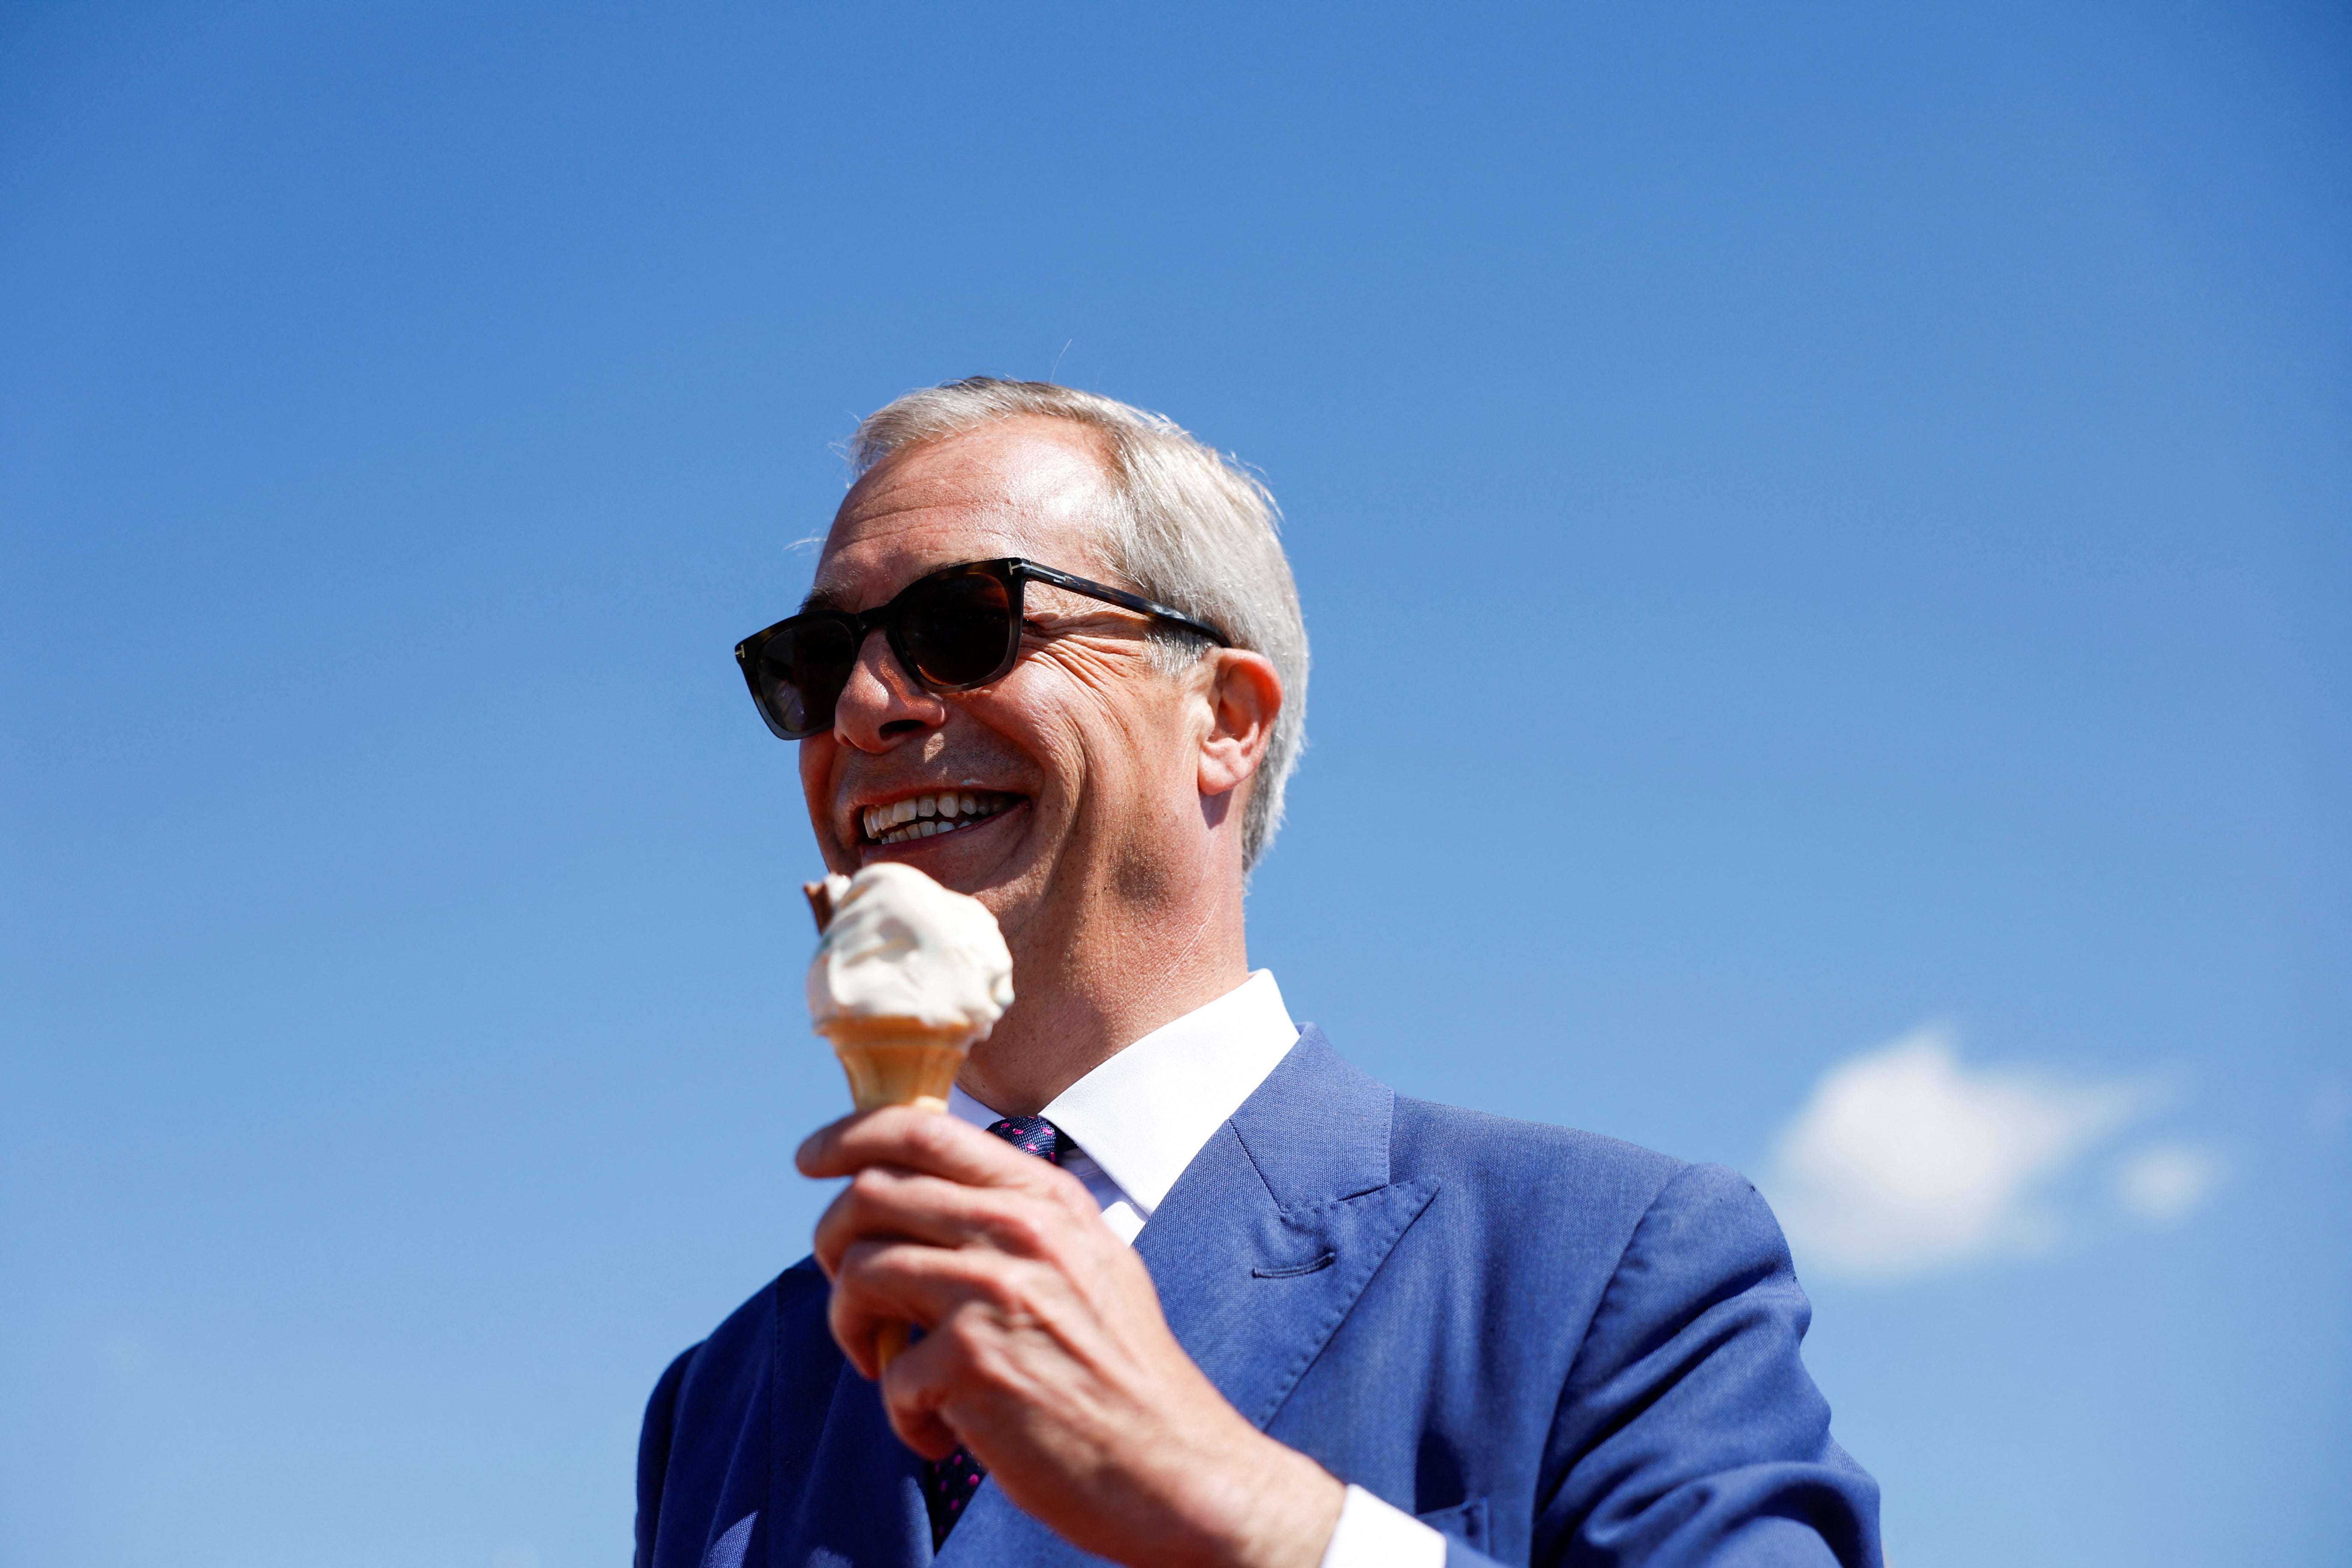 Reform UK Party Leader Nigel Farage eats an ice cream, on the day of the general election, in Clacton-on-Sea